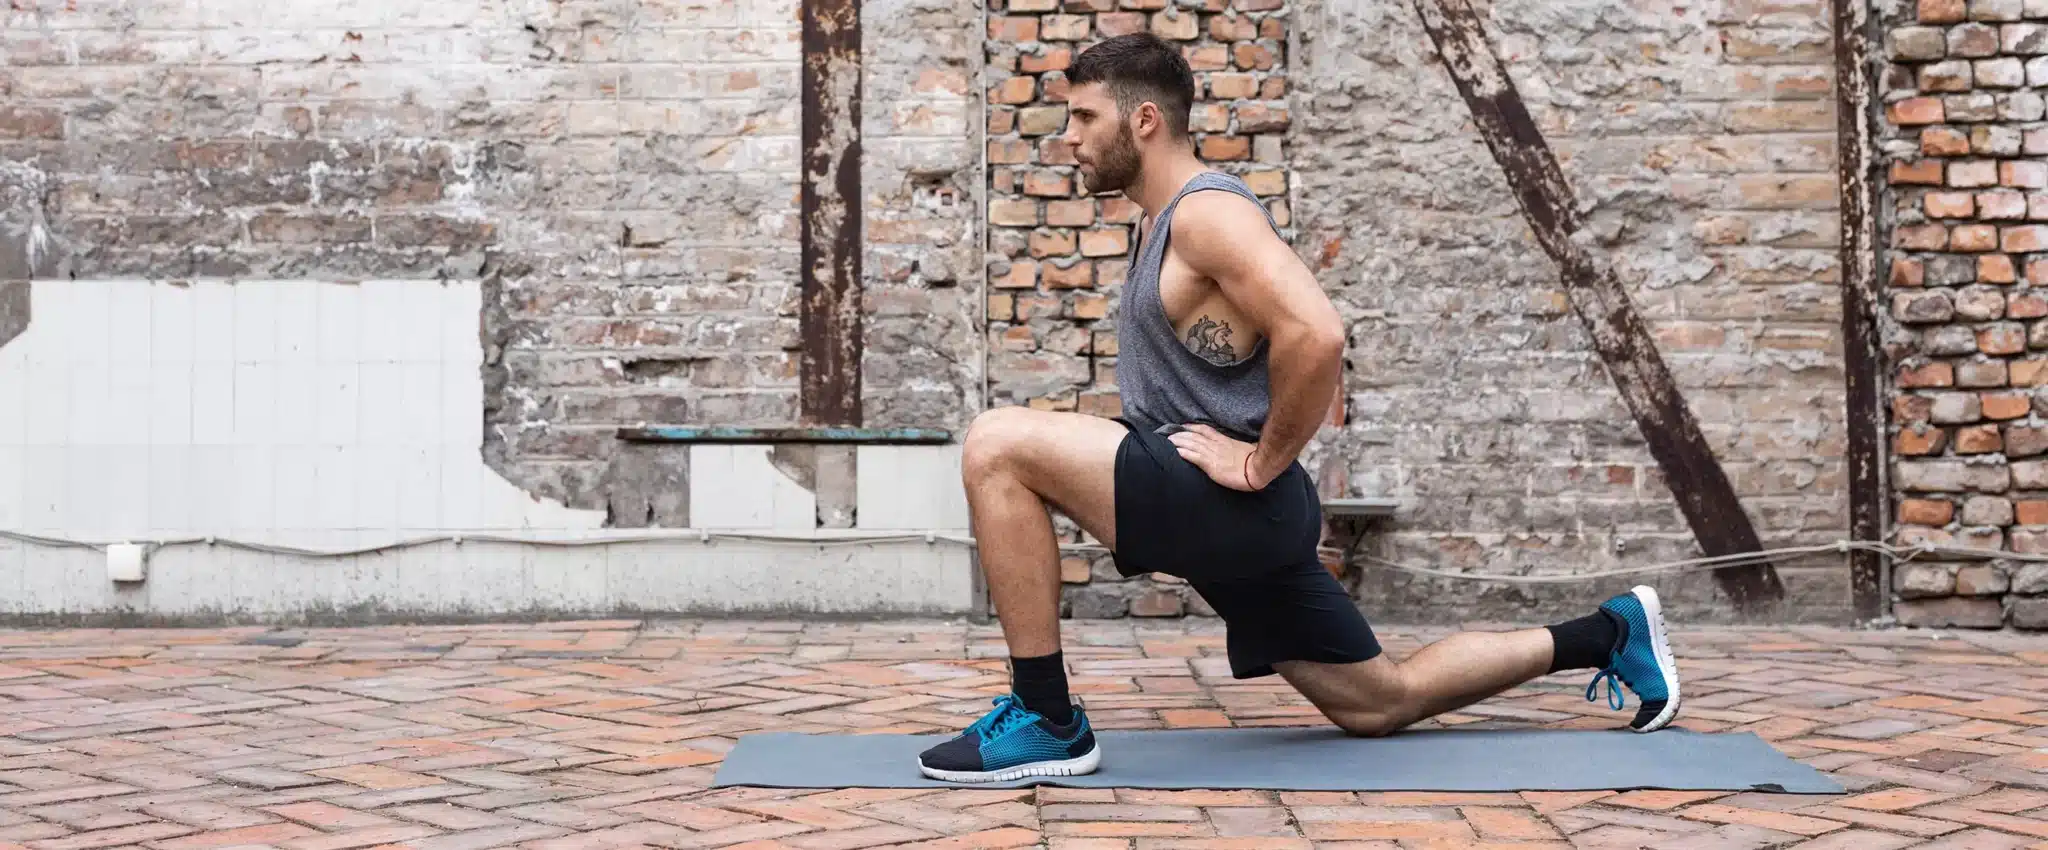 If You’re a Human, You Need a Functional Fitness Routine